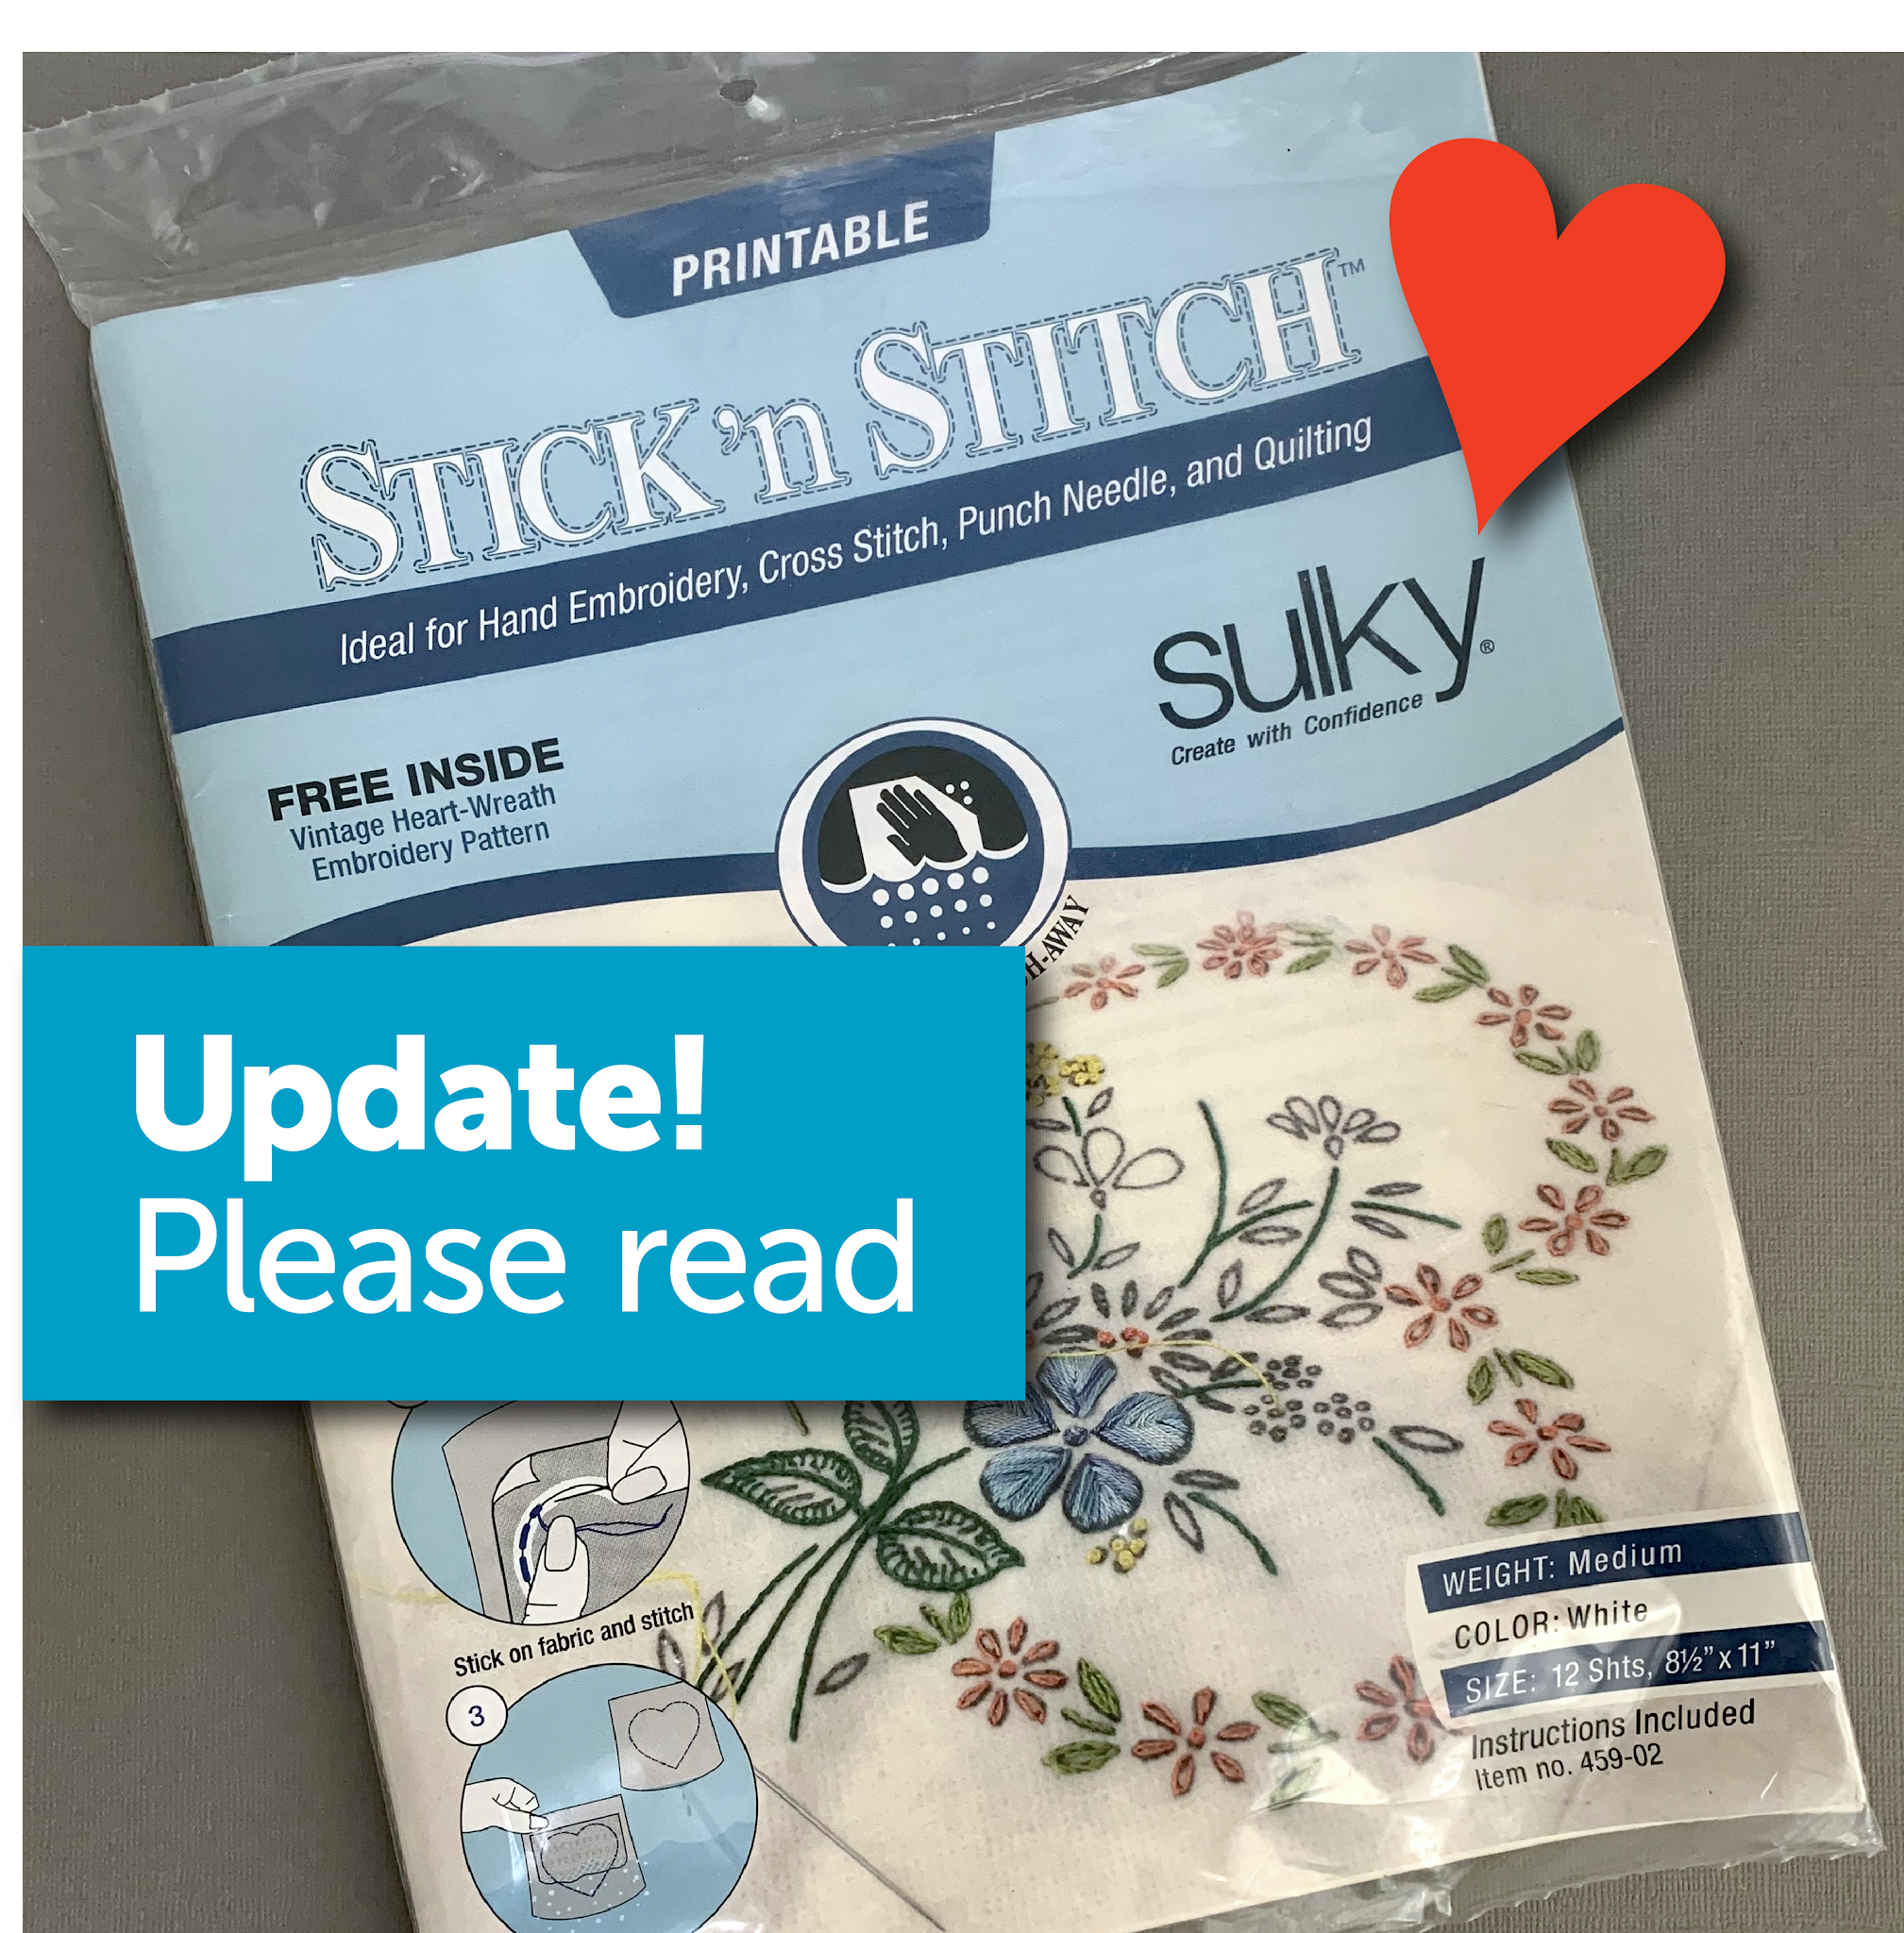 mmmcrafts: having problems with your Sulky Printable Sticky Fabri